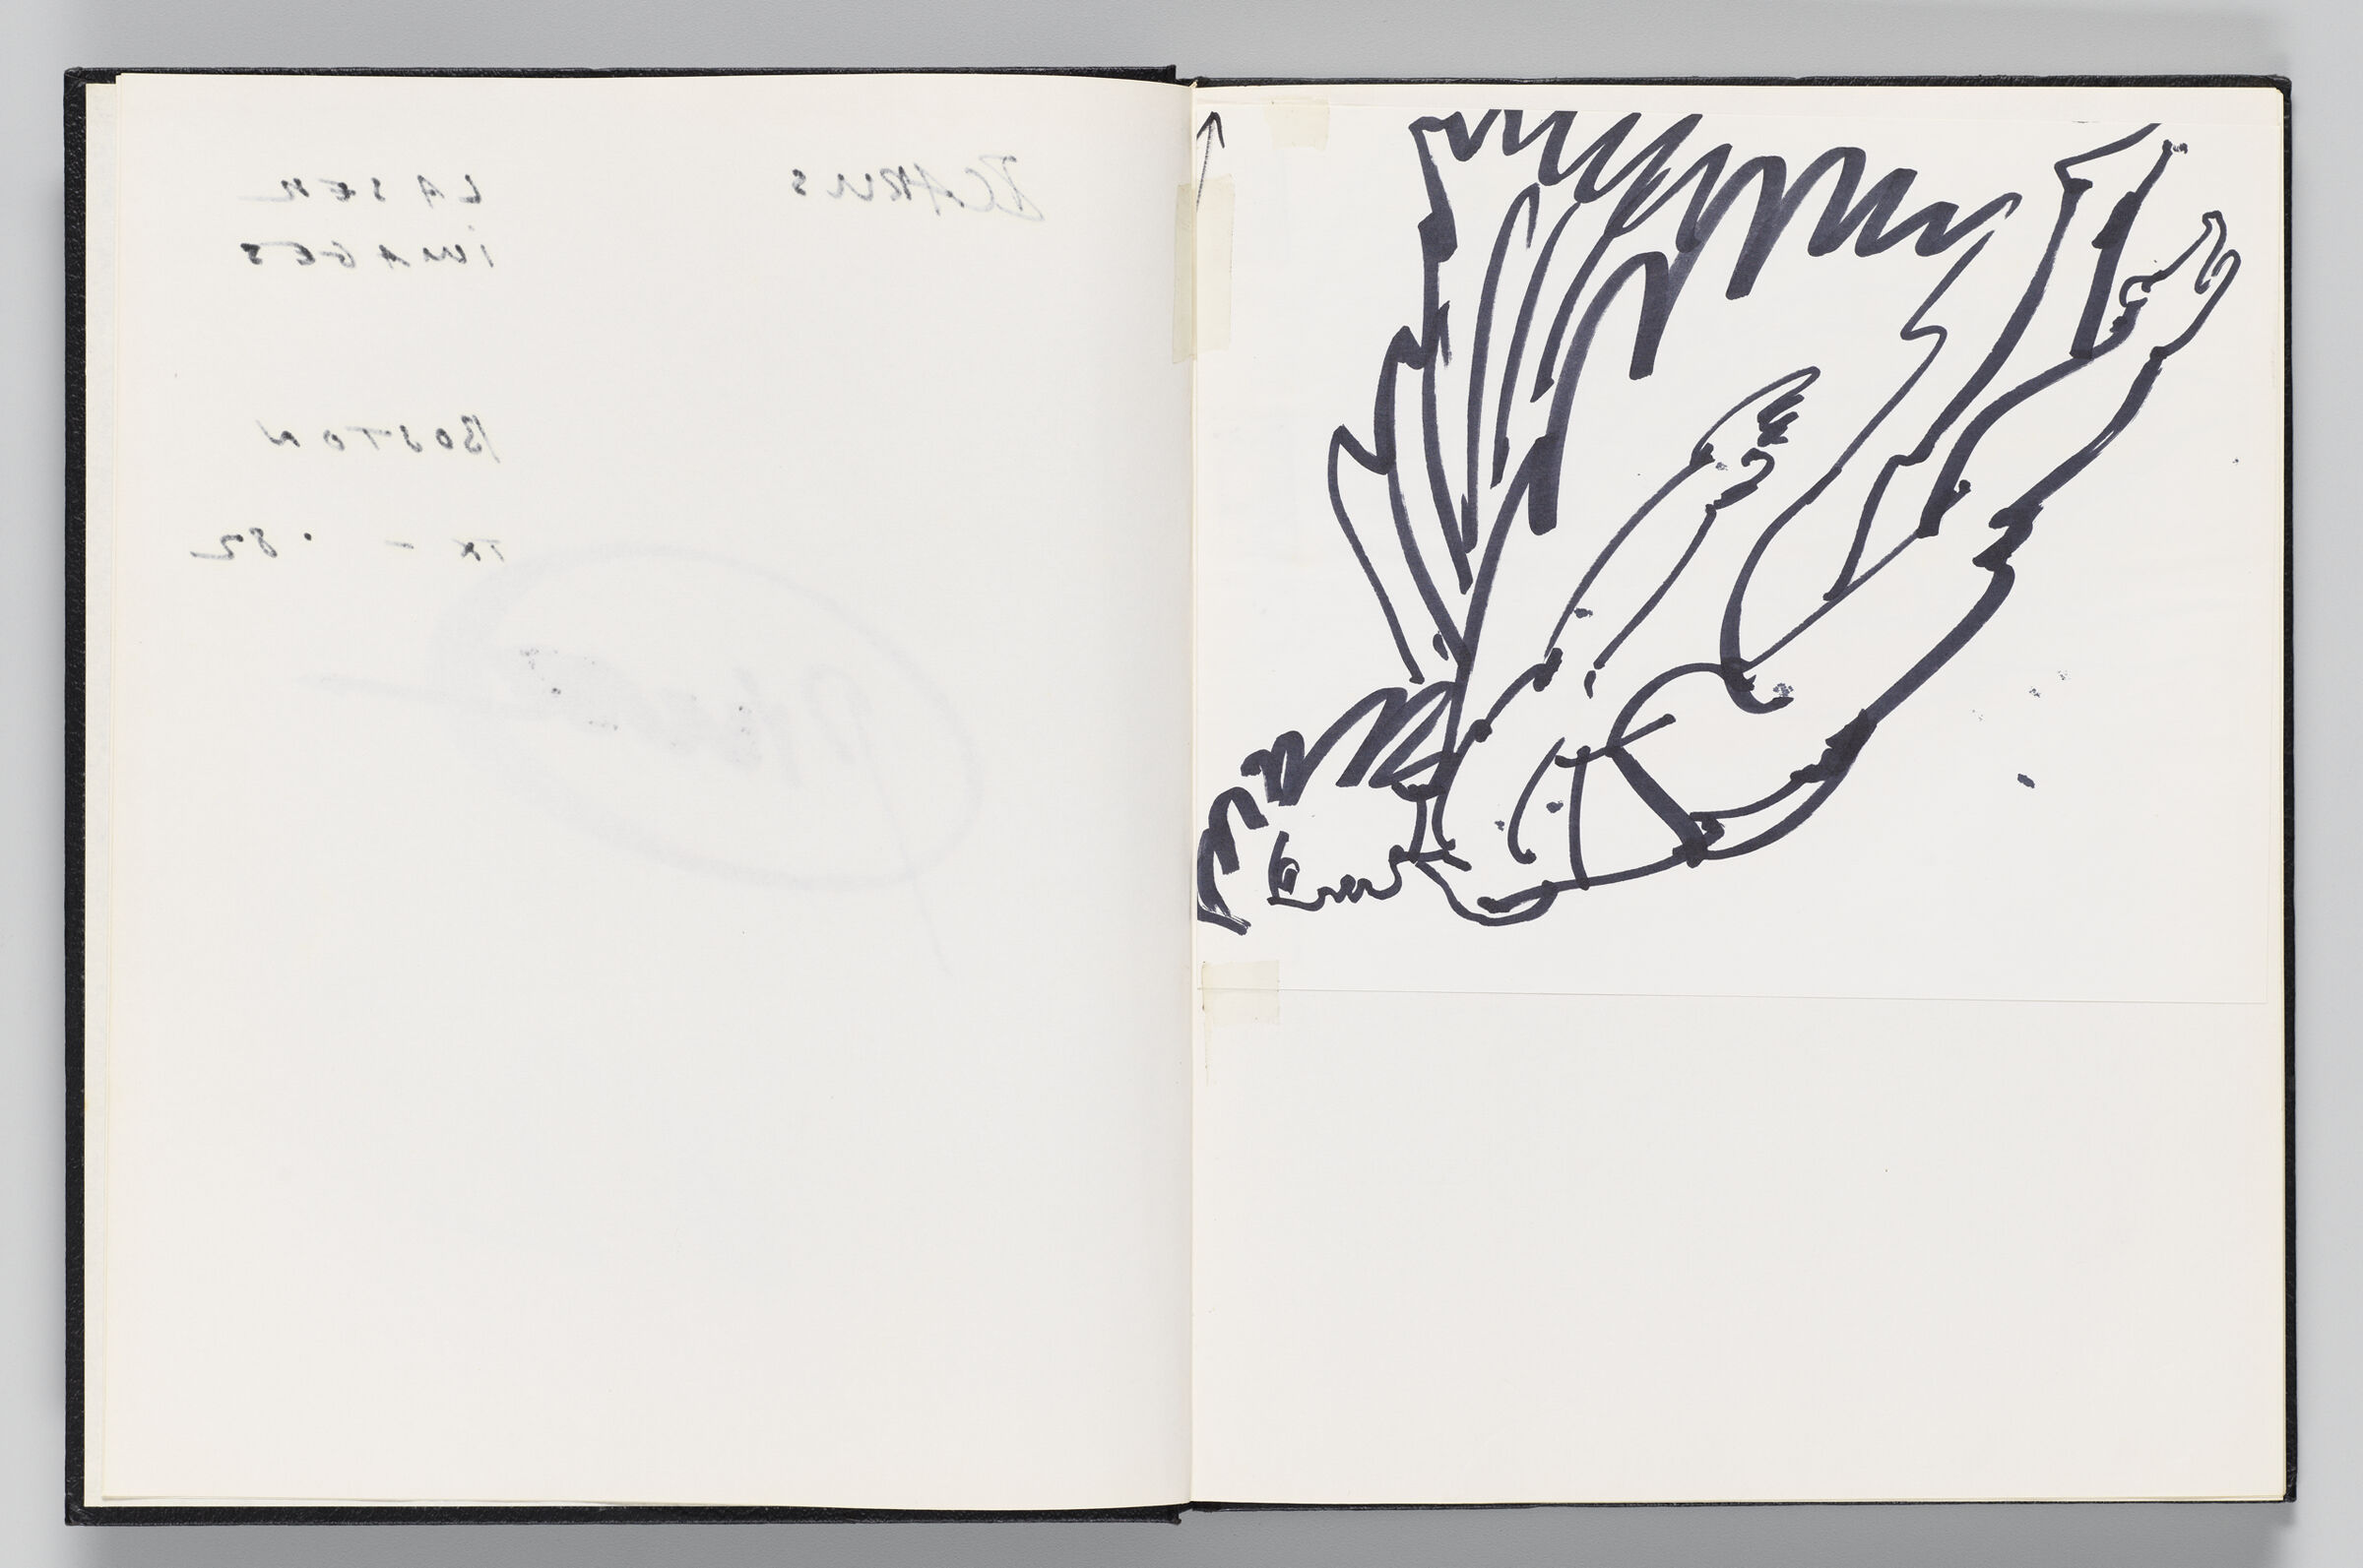 Untitled (Bleed-Through Of Previous Page, Left Page); Untitled (Adhered Icarus Sketch, Right Page)